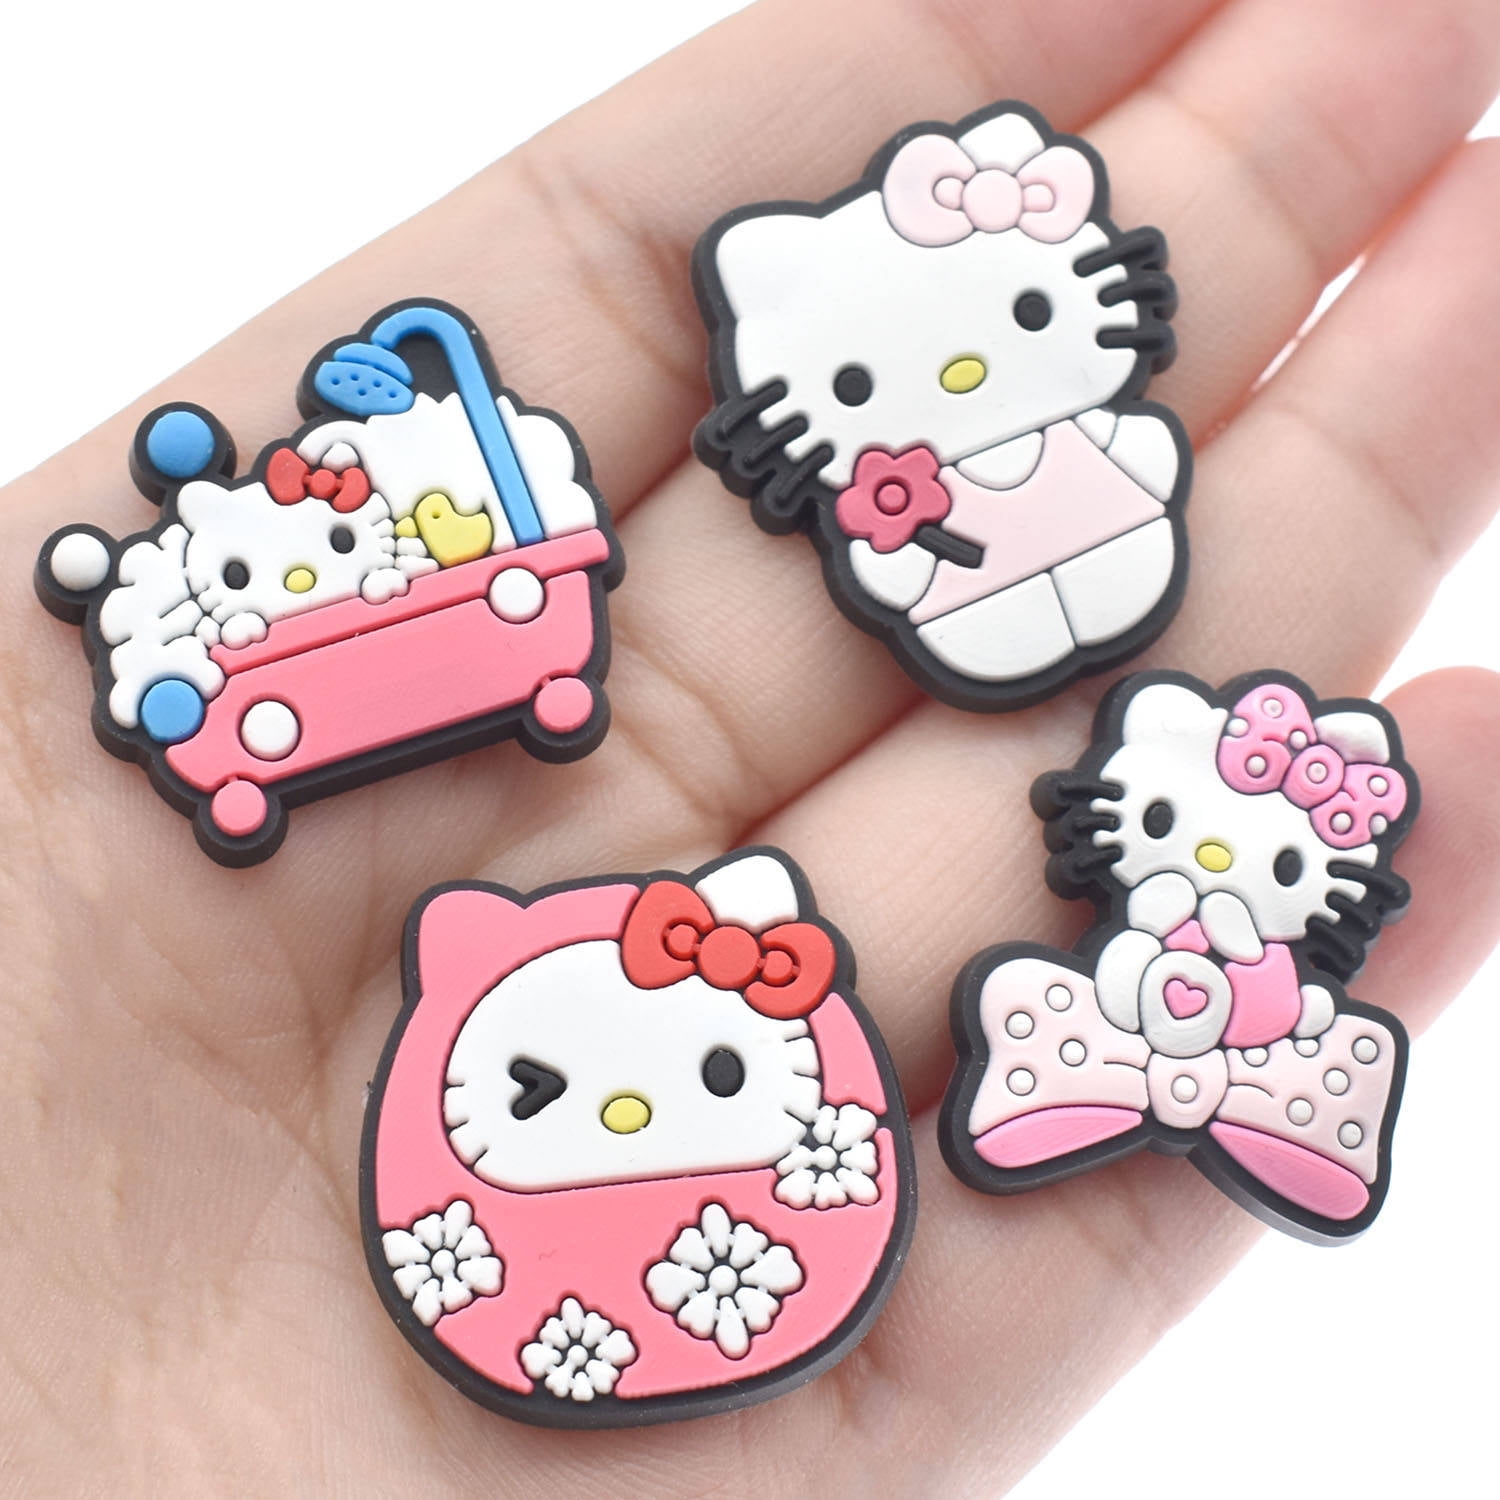 hitioCC 50 Pcs Crock Shoe Charms for Kids Girls, Cute Kitty Shoe Charms for  Party Favors Gifts, Pink kawaii Shoe Charms for Wristband Bracelets Sandals  Decoration Accessories. 50 Pcs Cute Kitty Charms